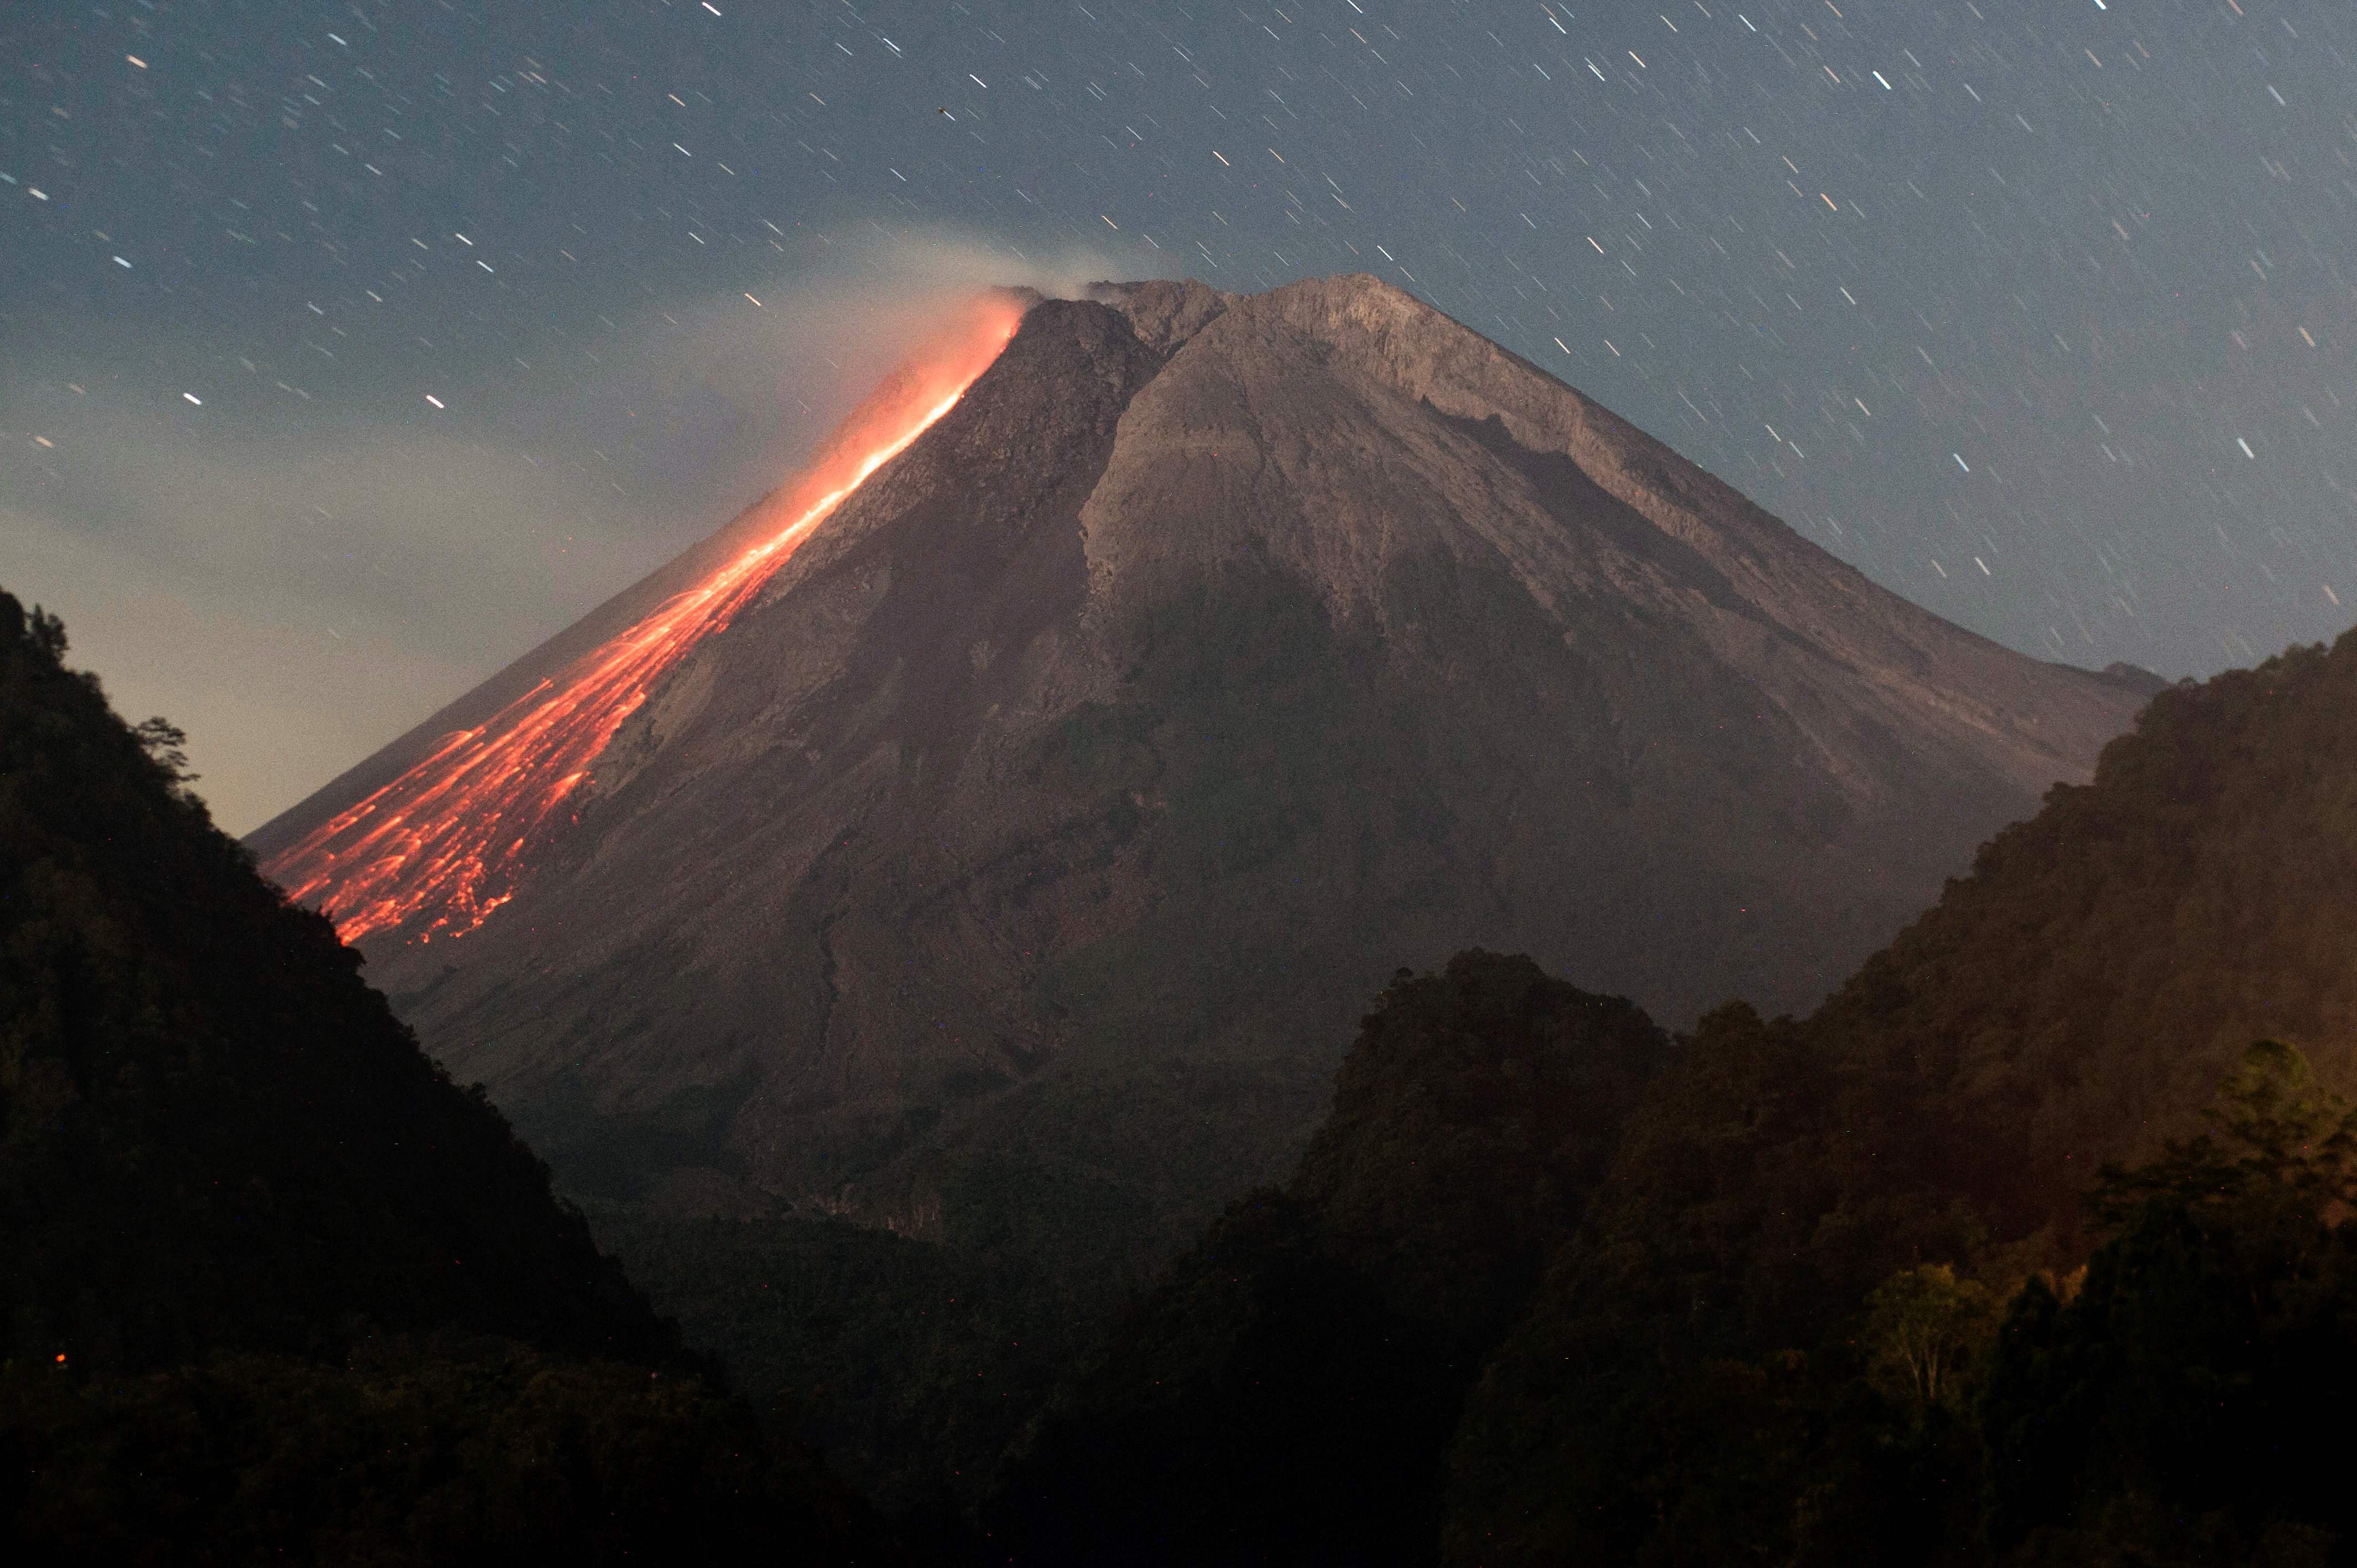 Lava flows down Mount Merapi, Indonesia’s most active volcano, as seen from Sleman in Yogyakarta on 18 July